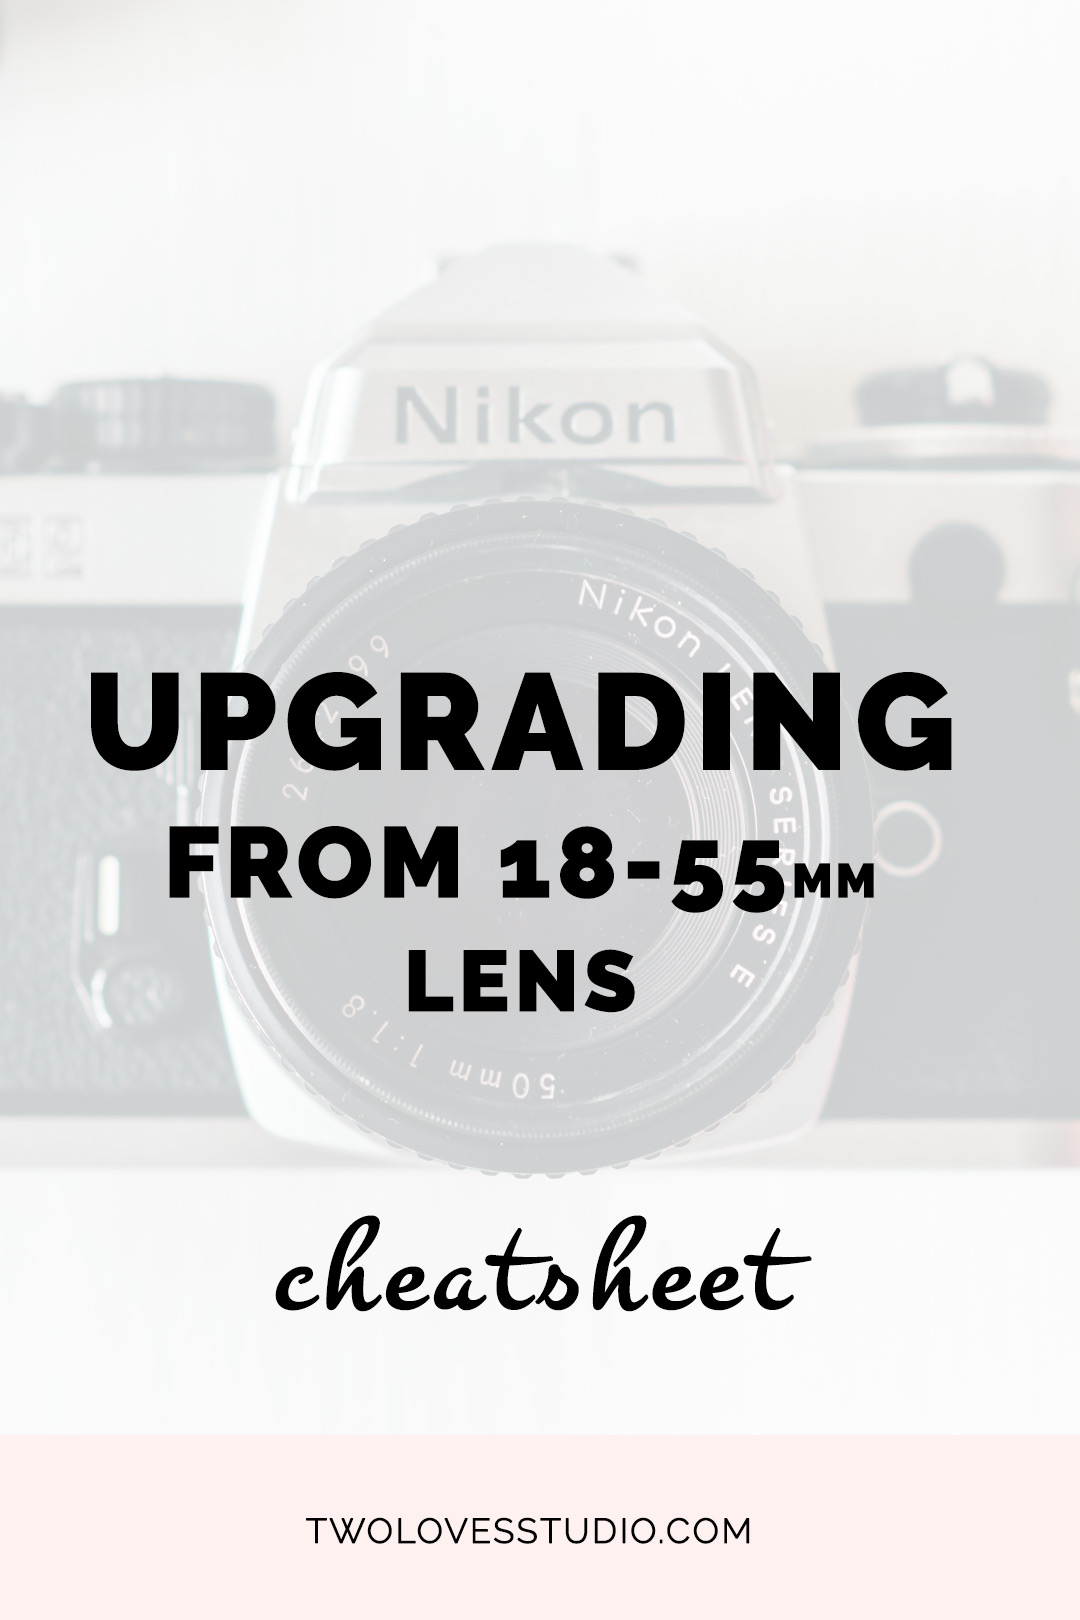 Considering upgrading your 18-55mm lens? Not sure where to start? CLICK through to get access to this FREE cheatsheet to help you consider whether or not to upgrade.